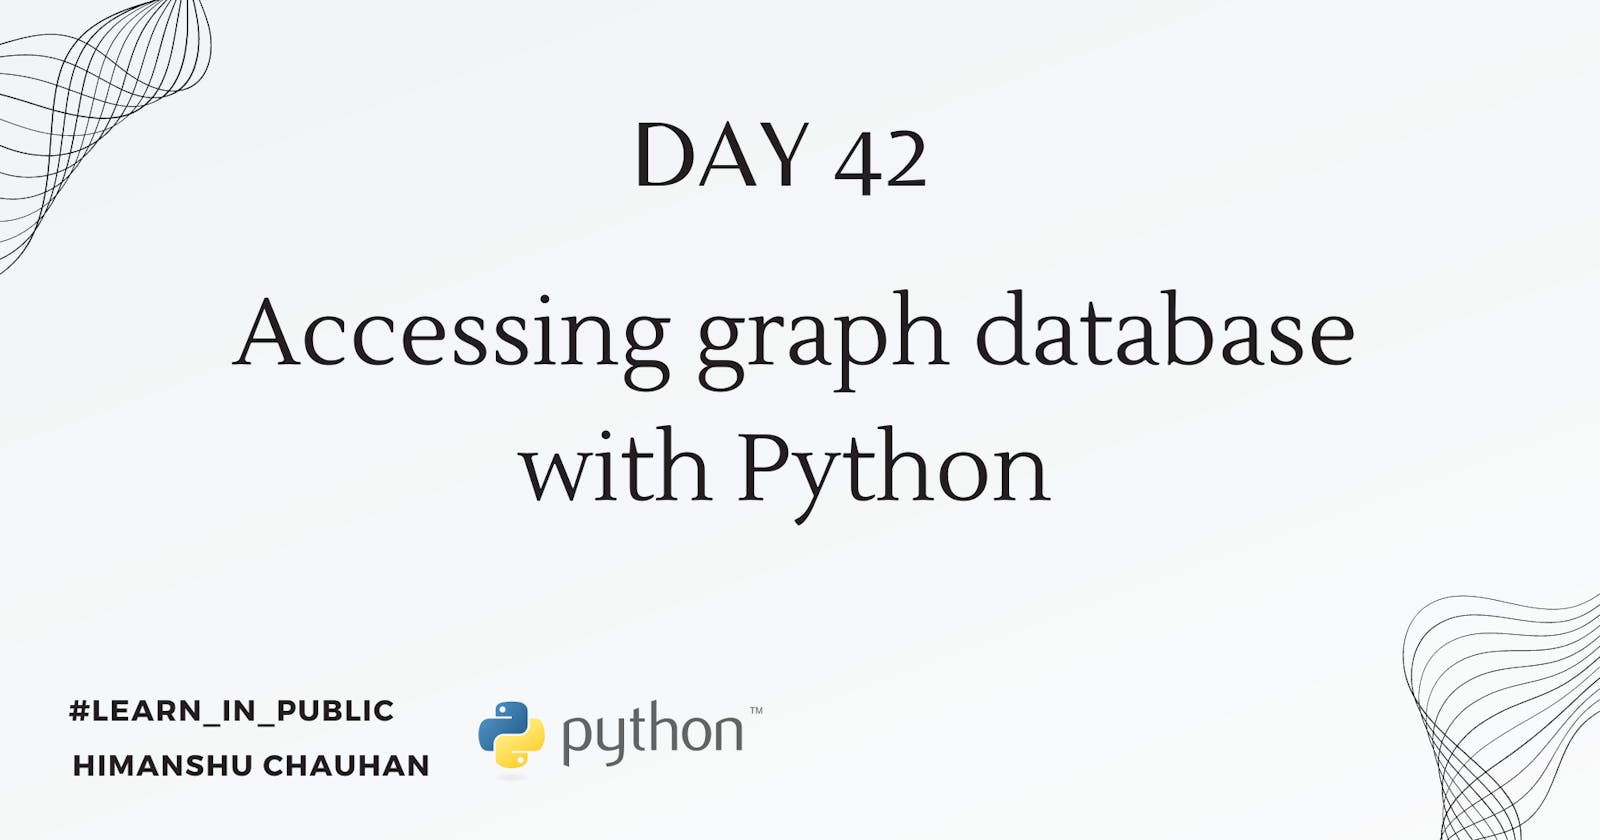 Day 42: Accessing graph database with Python